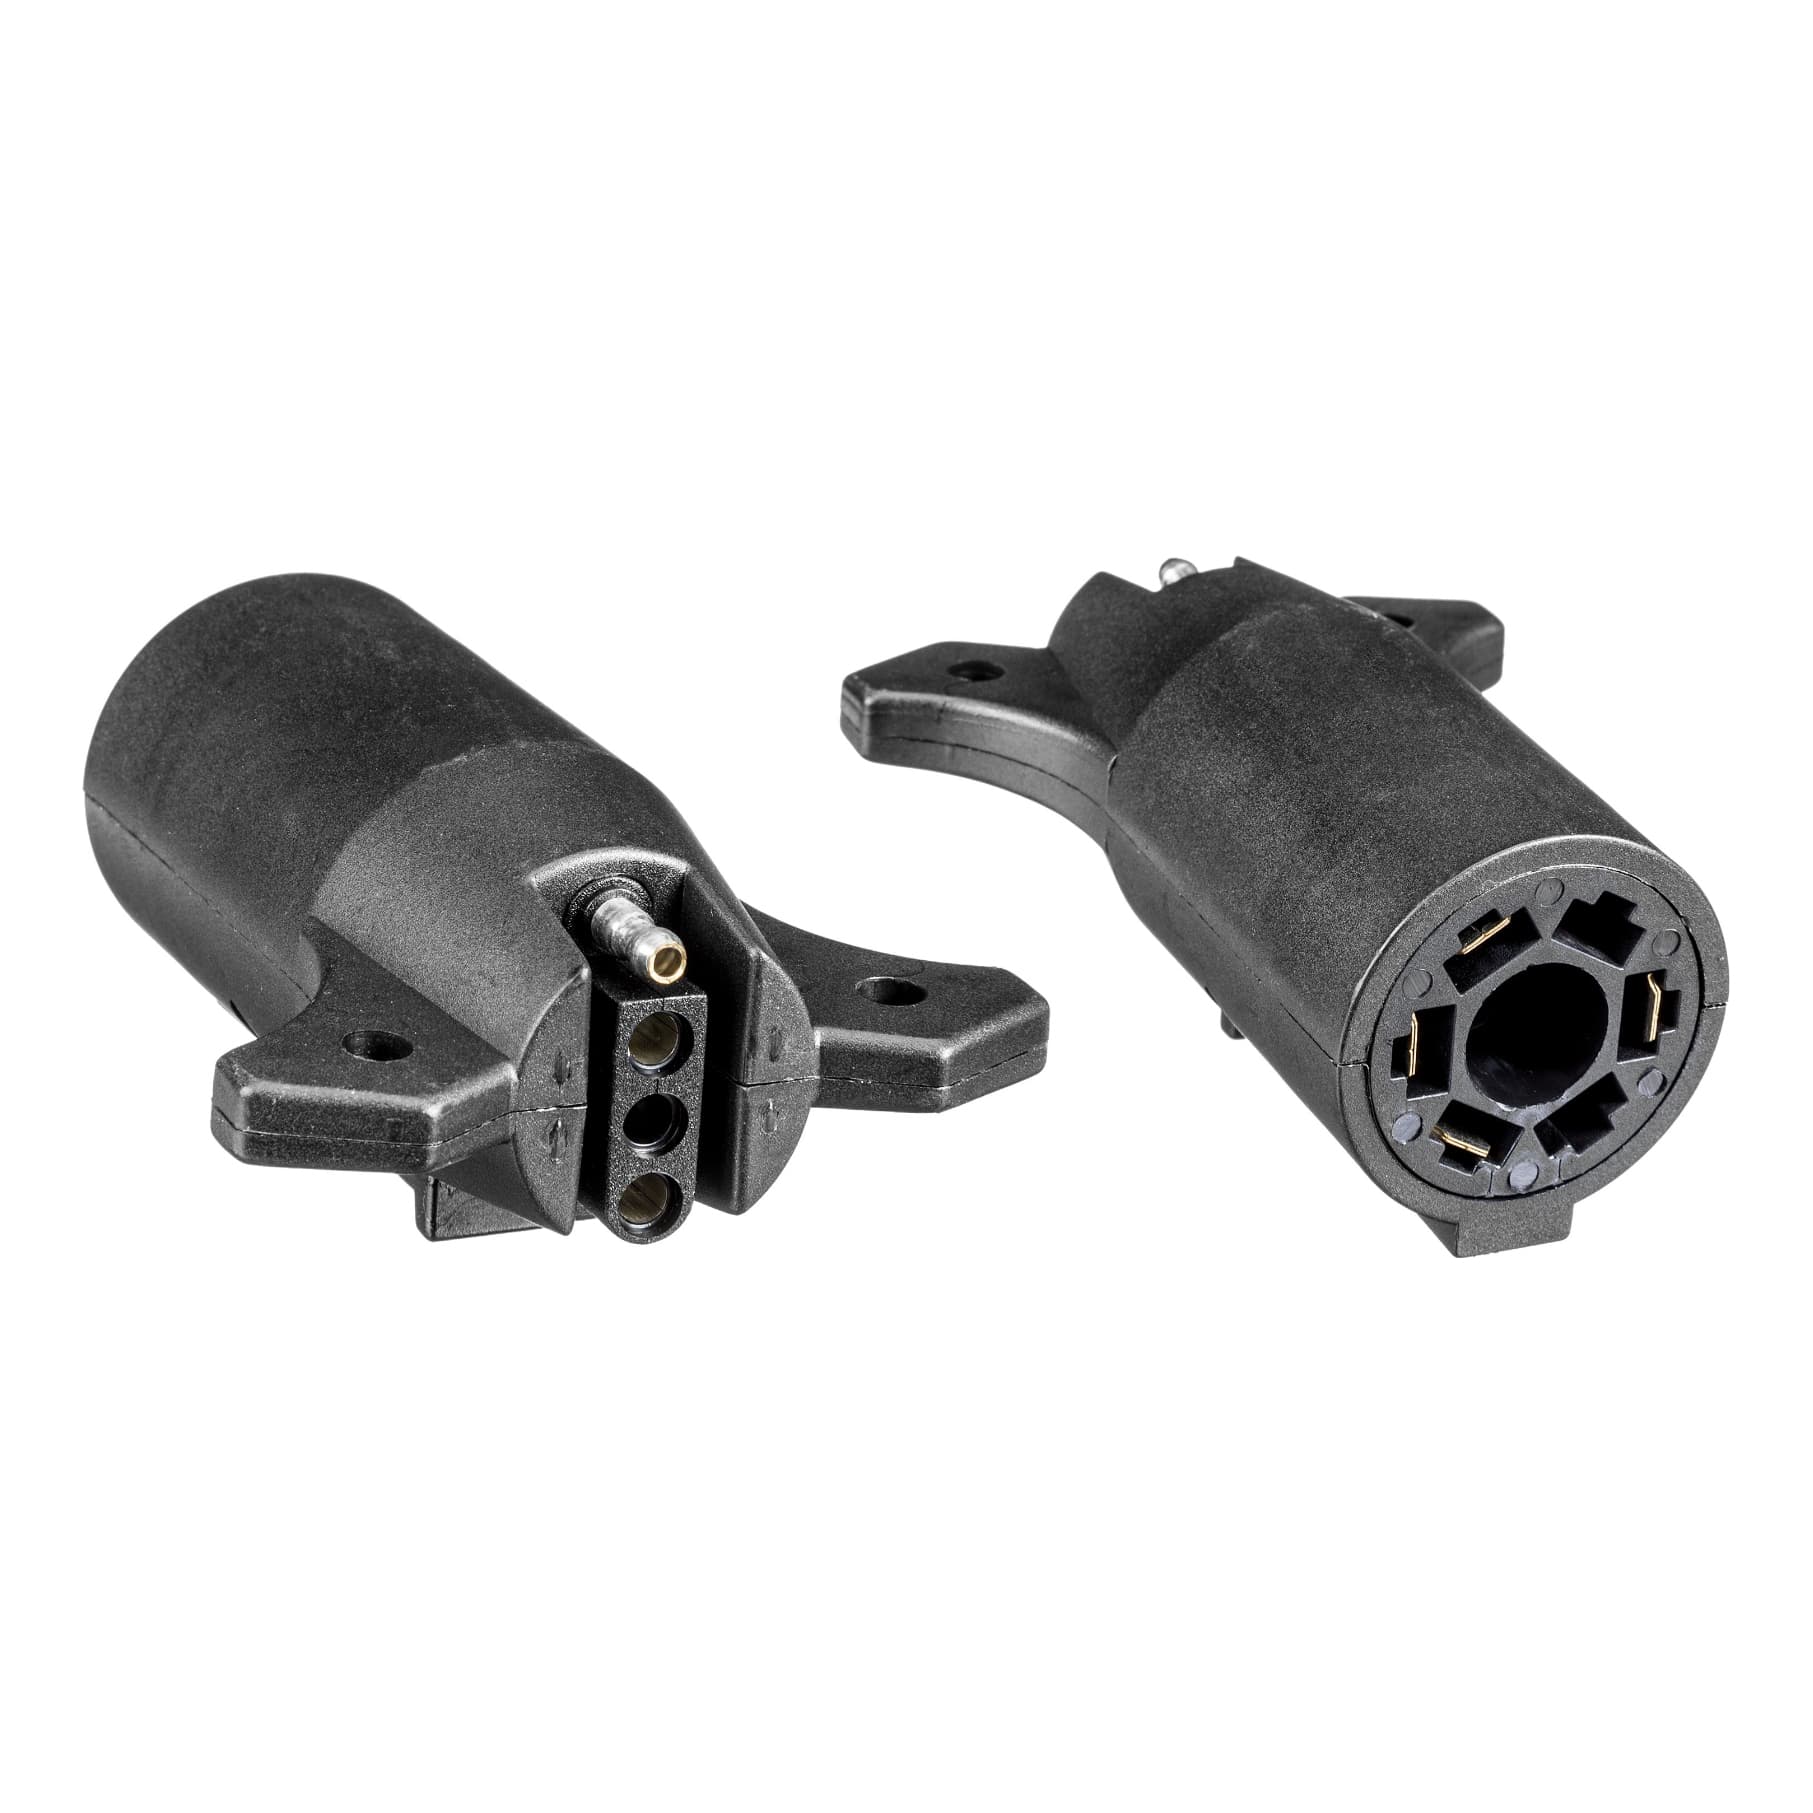 Bass Pro Shops® Trailer Wiring Adapters